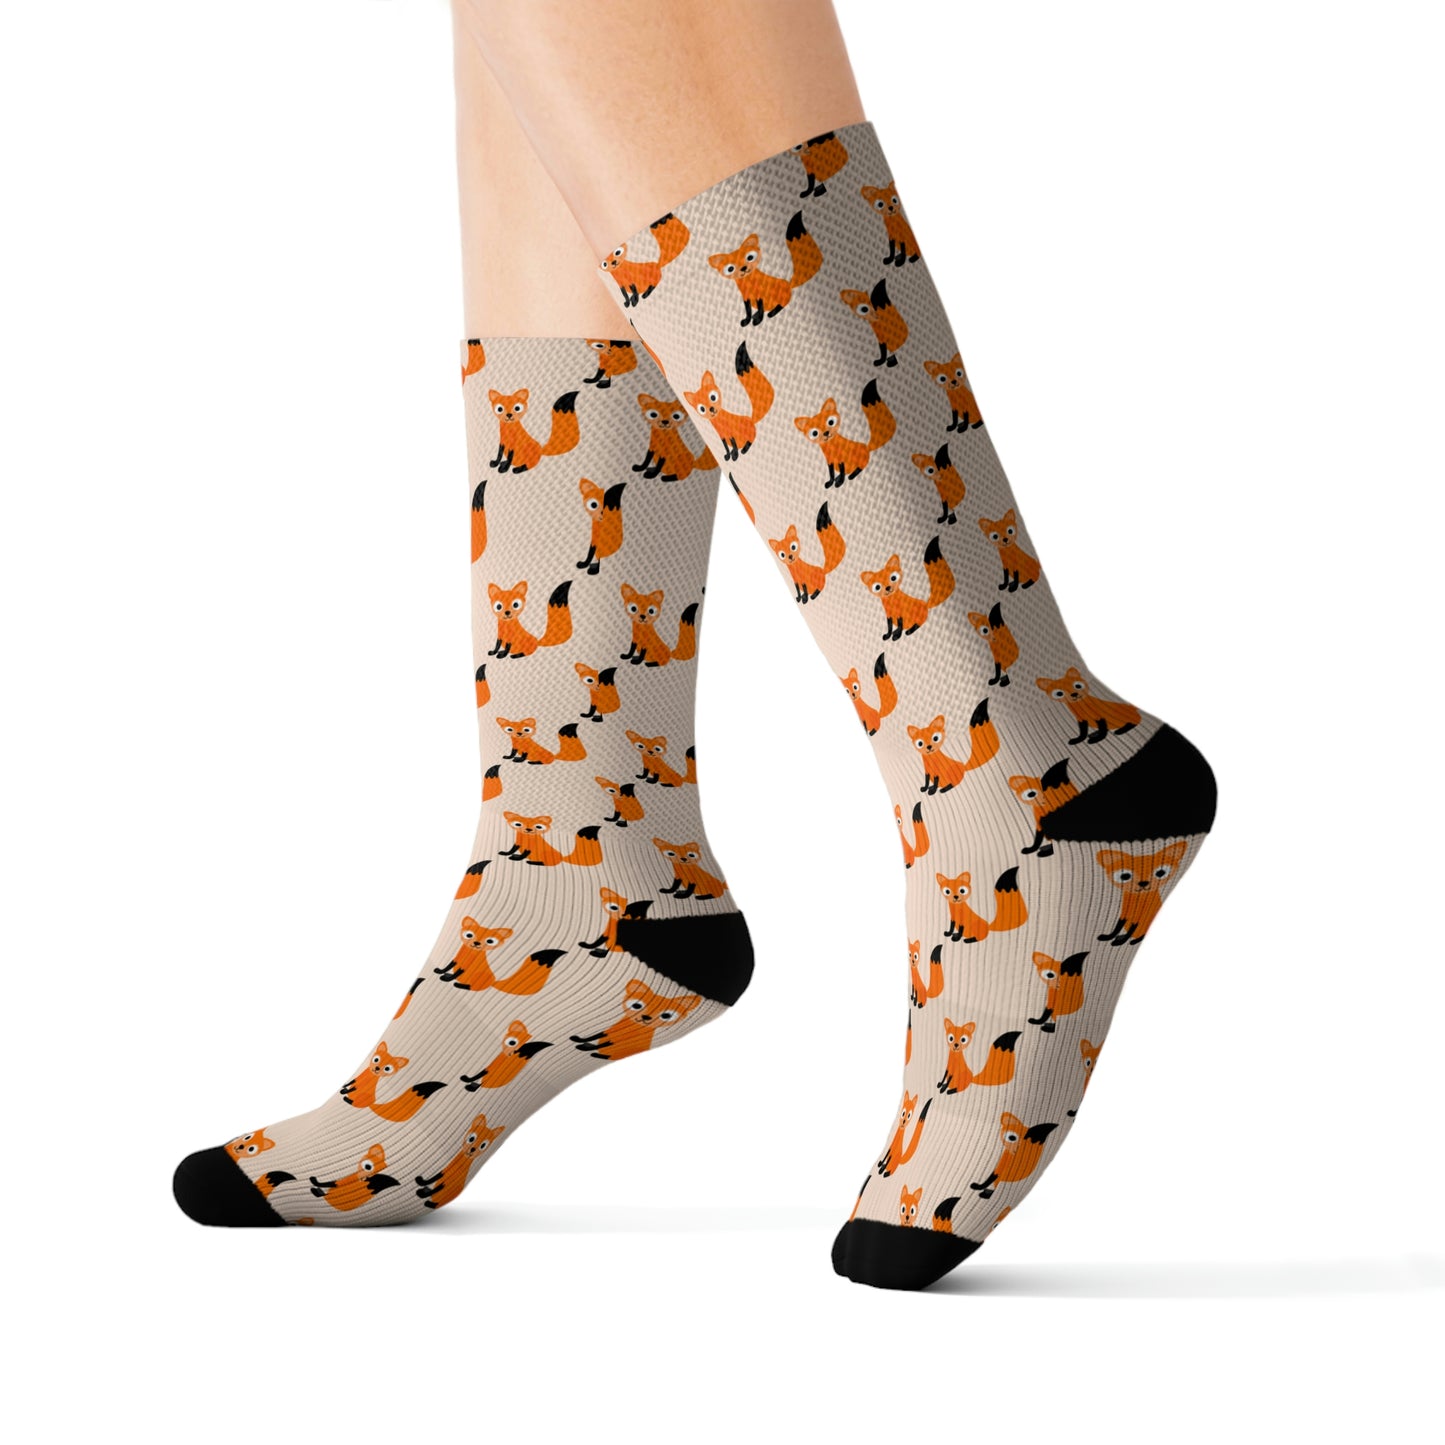 Fox Socks, Animal Pink Crew 3D Sublimation Women Men Designer Fun Novelty Cool Funky Crazy Casual Cute Unique Gift